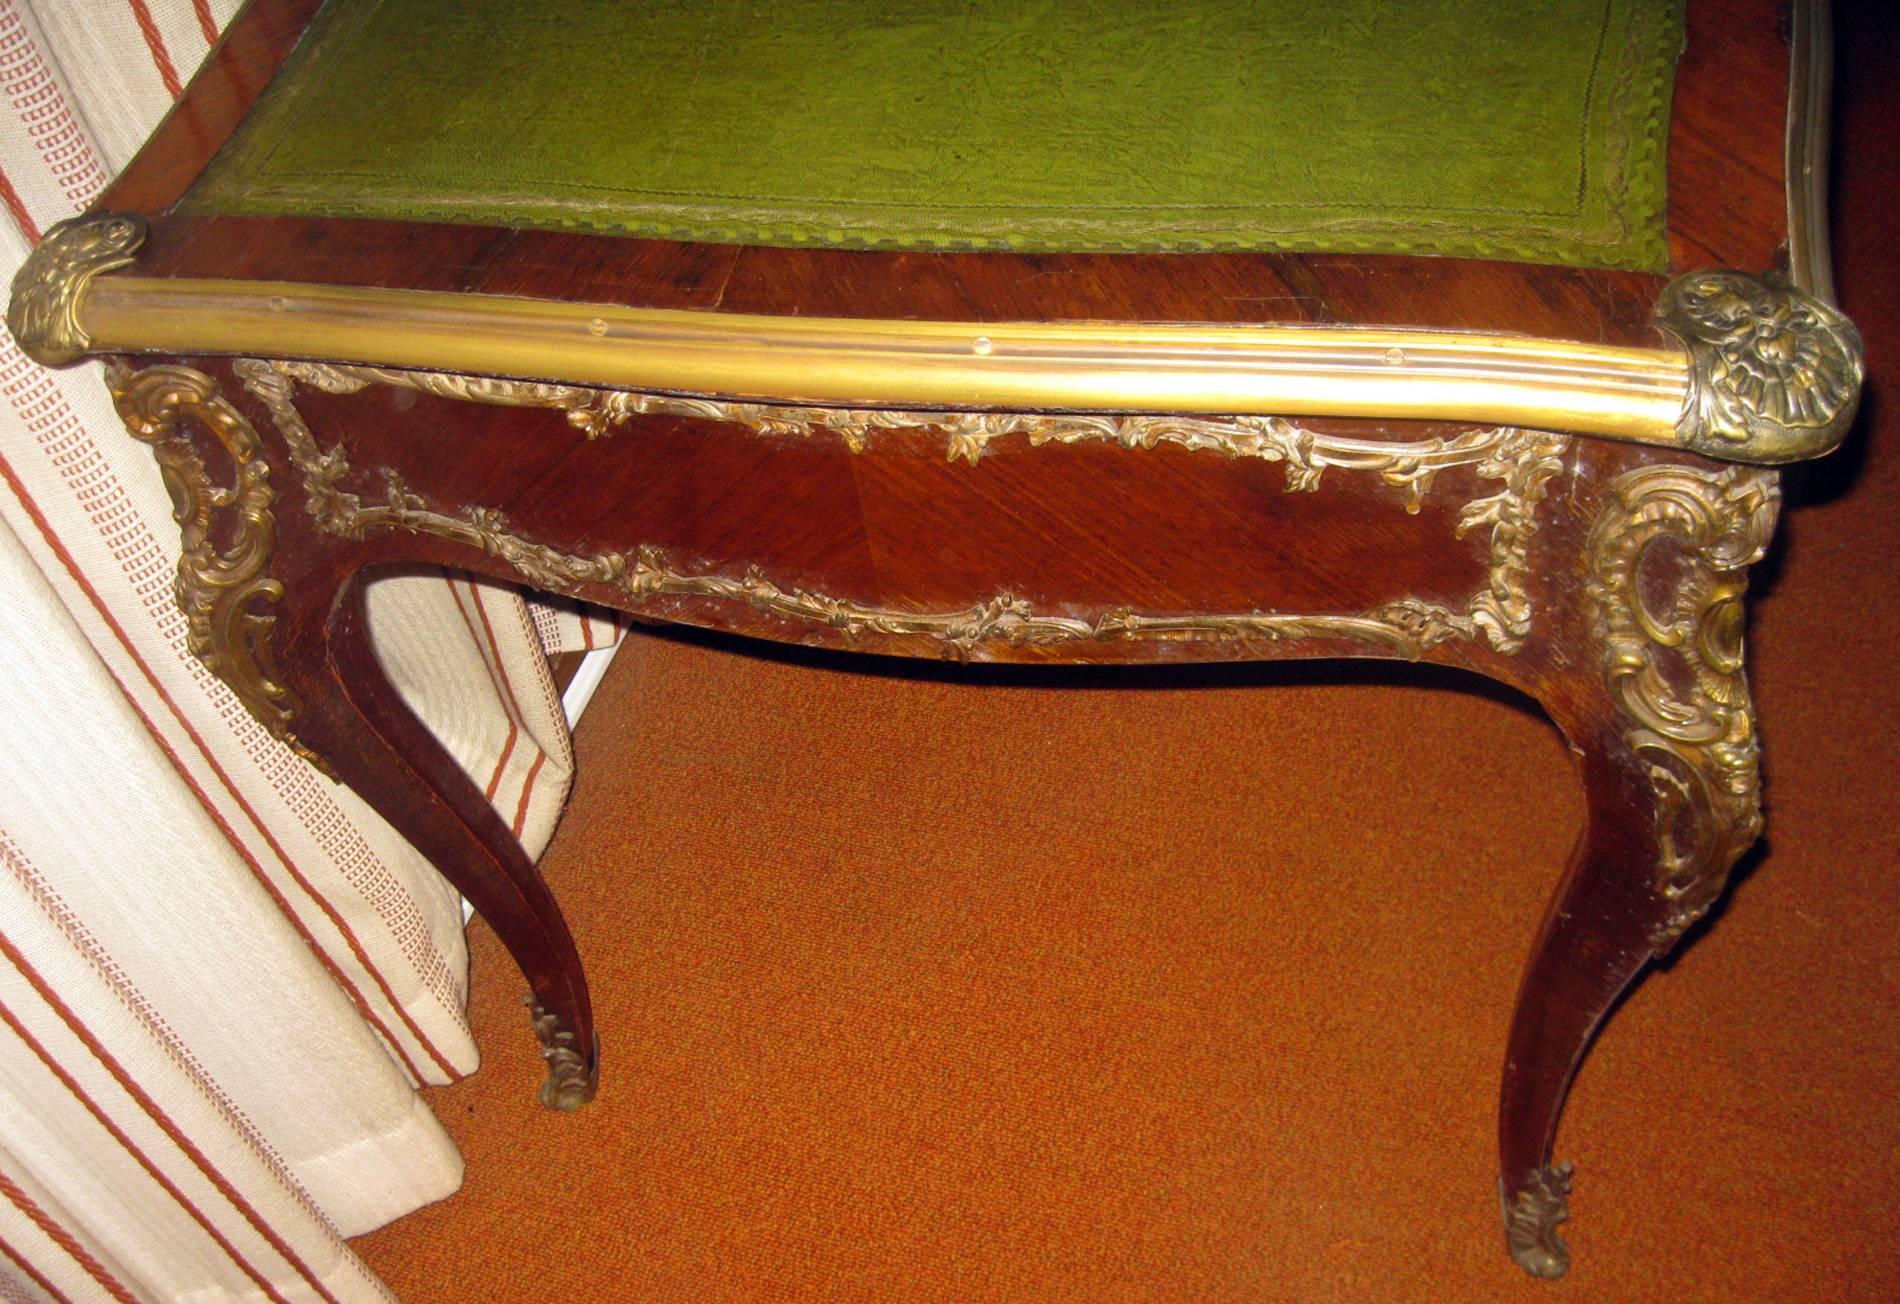 Handsome large size French writing table made of kingwood and featuring a Moroccan leather top, foliate bronze ormolu mounts, cabriole legs and three drawers. The desk is finished on all sides. Nice old patina on ormolu.